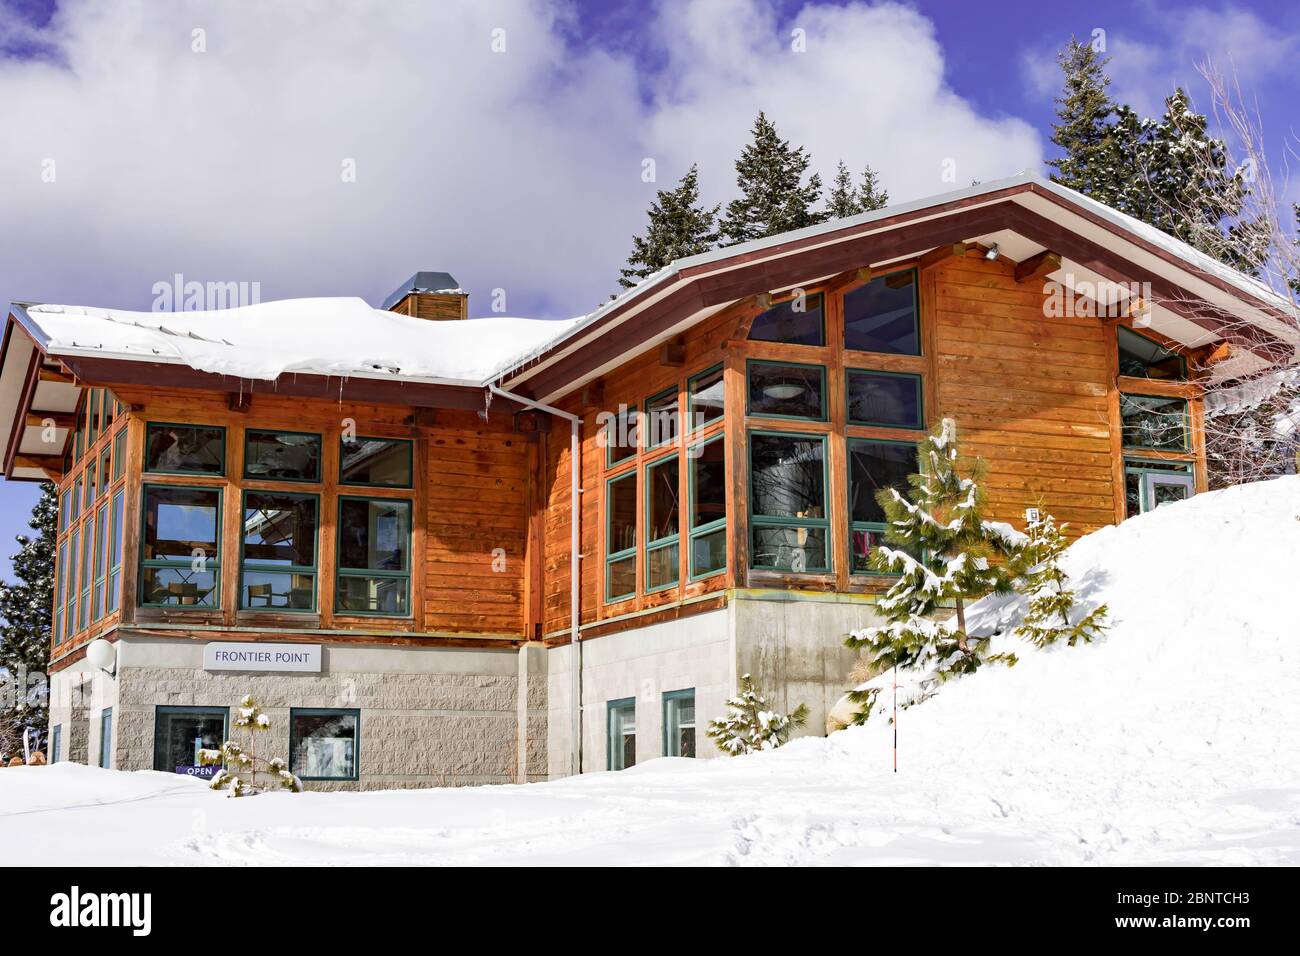 Frontier Point Lodge & Nordic Center - Bogus Basin, Boise Idaho USA, March 30, 2020 Stock Photo